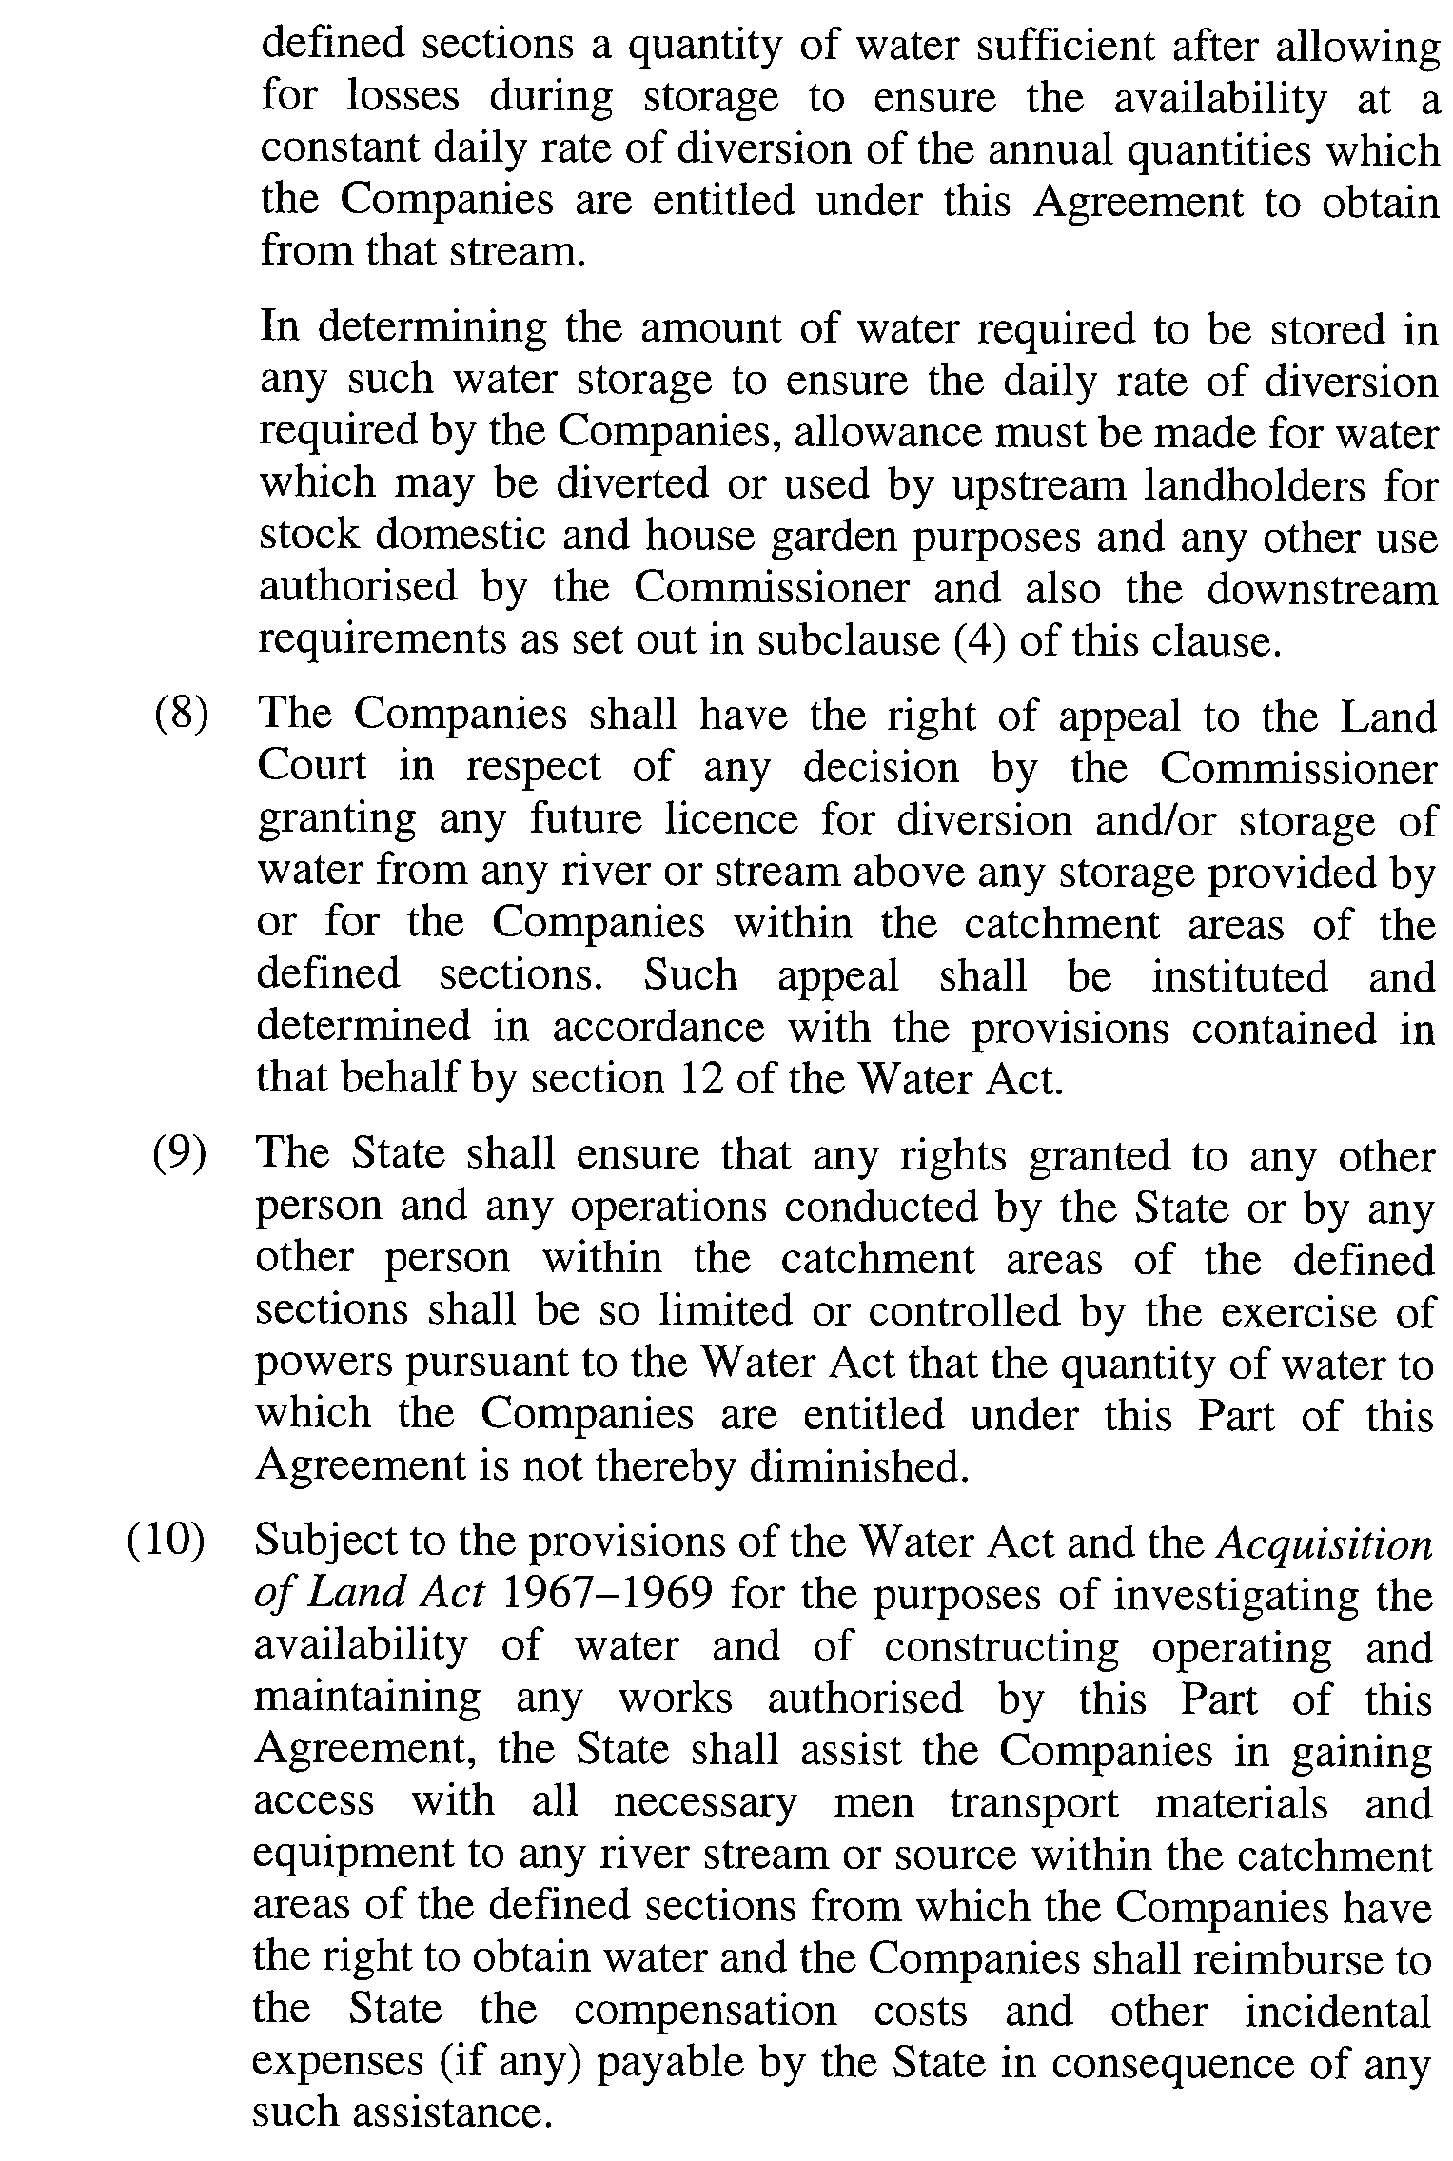 scan of agreement text